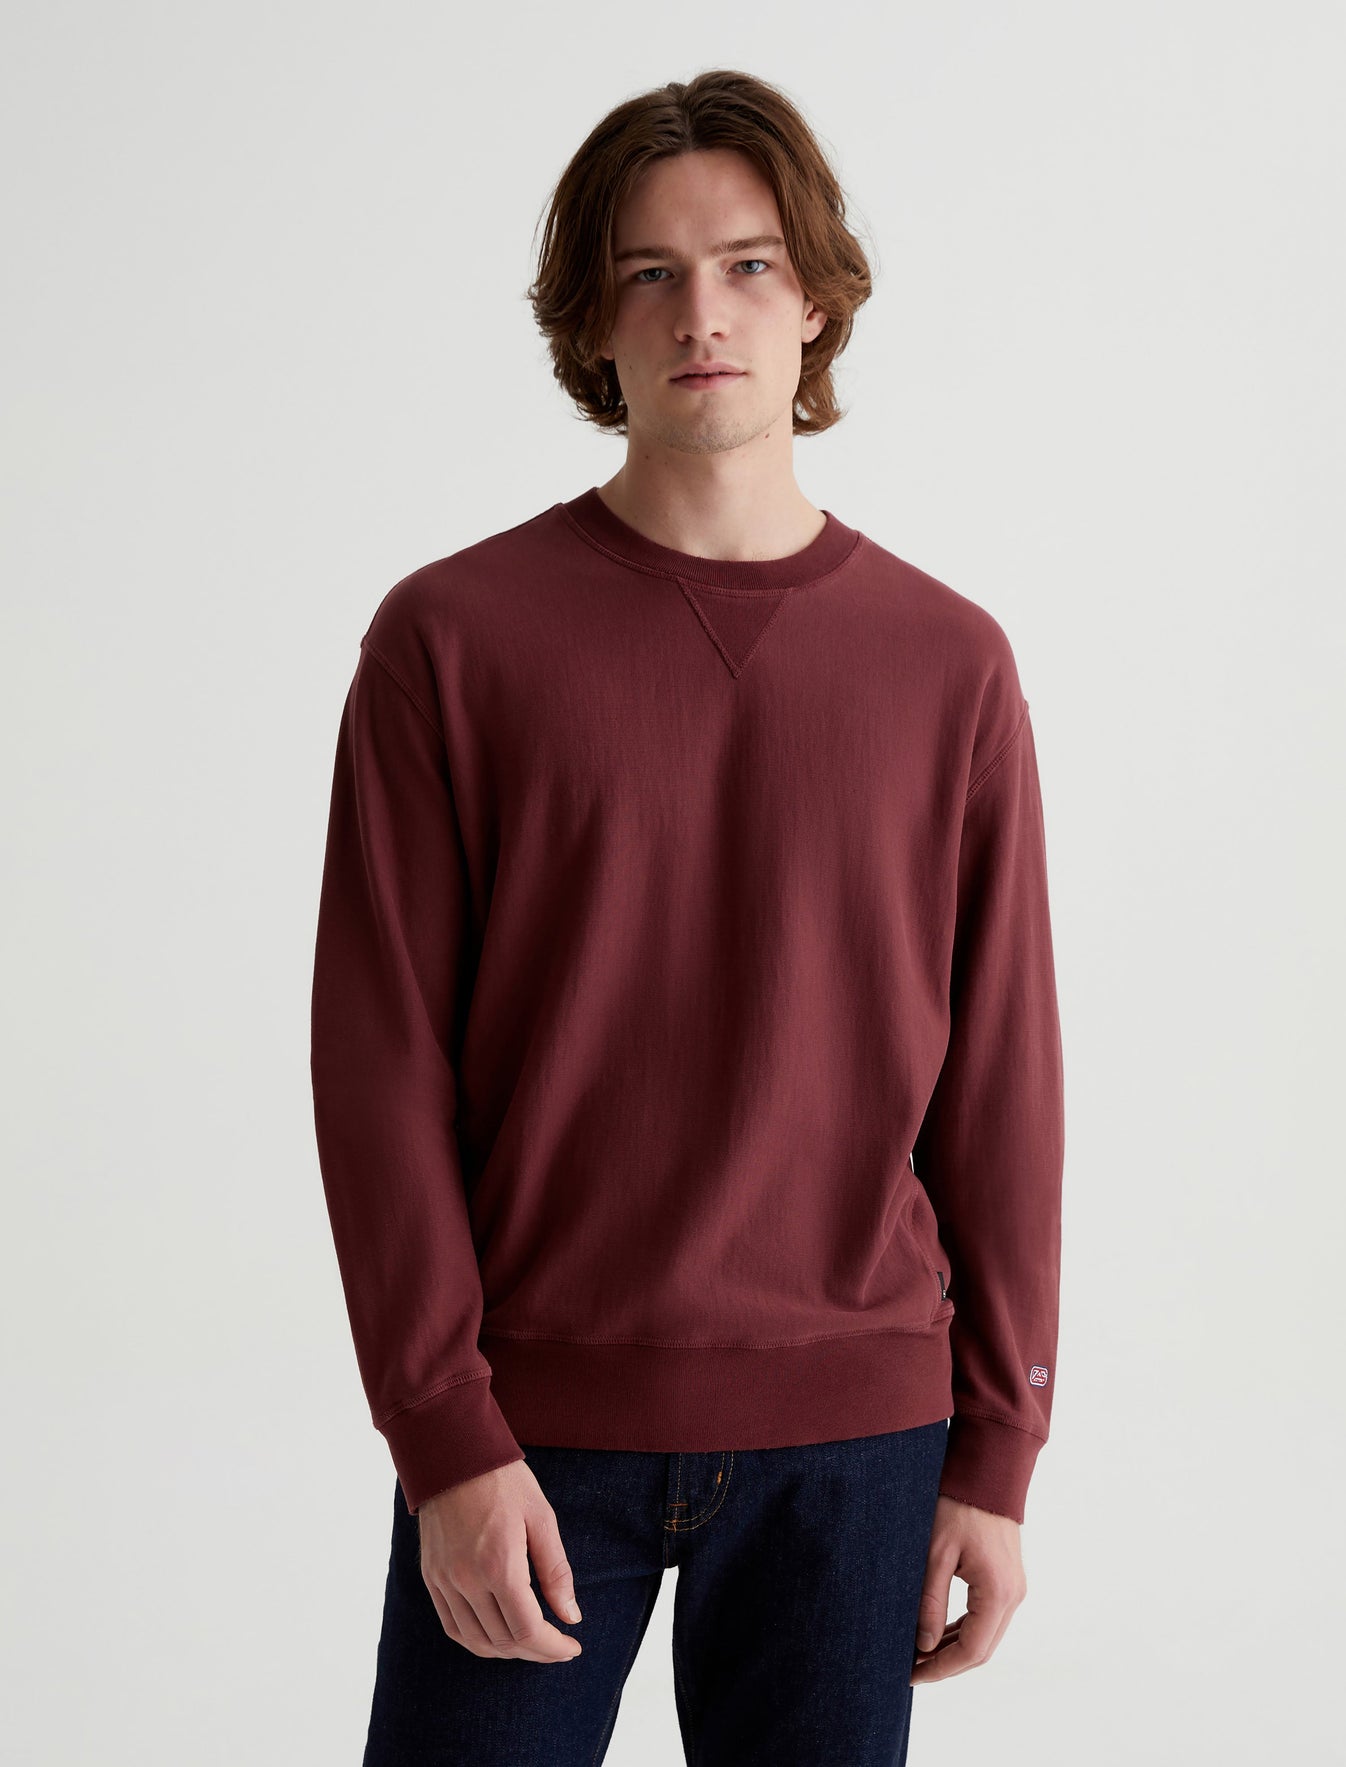 Arc Panelled Sweatshirt 5 Years Dark Plum Relaxed Fit Crew Neck Panelled Mens Top Photo 1